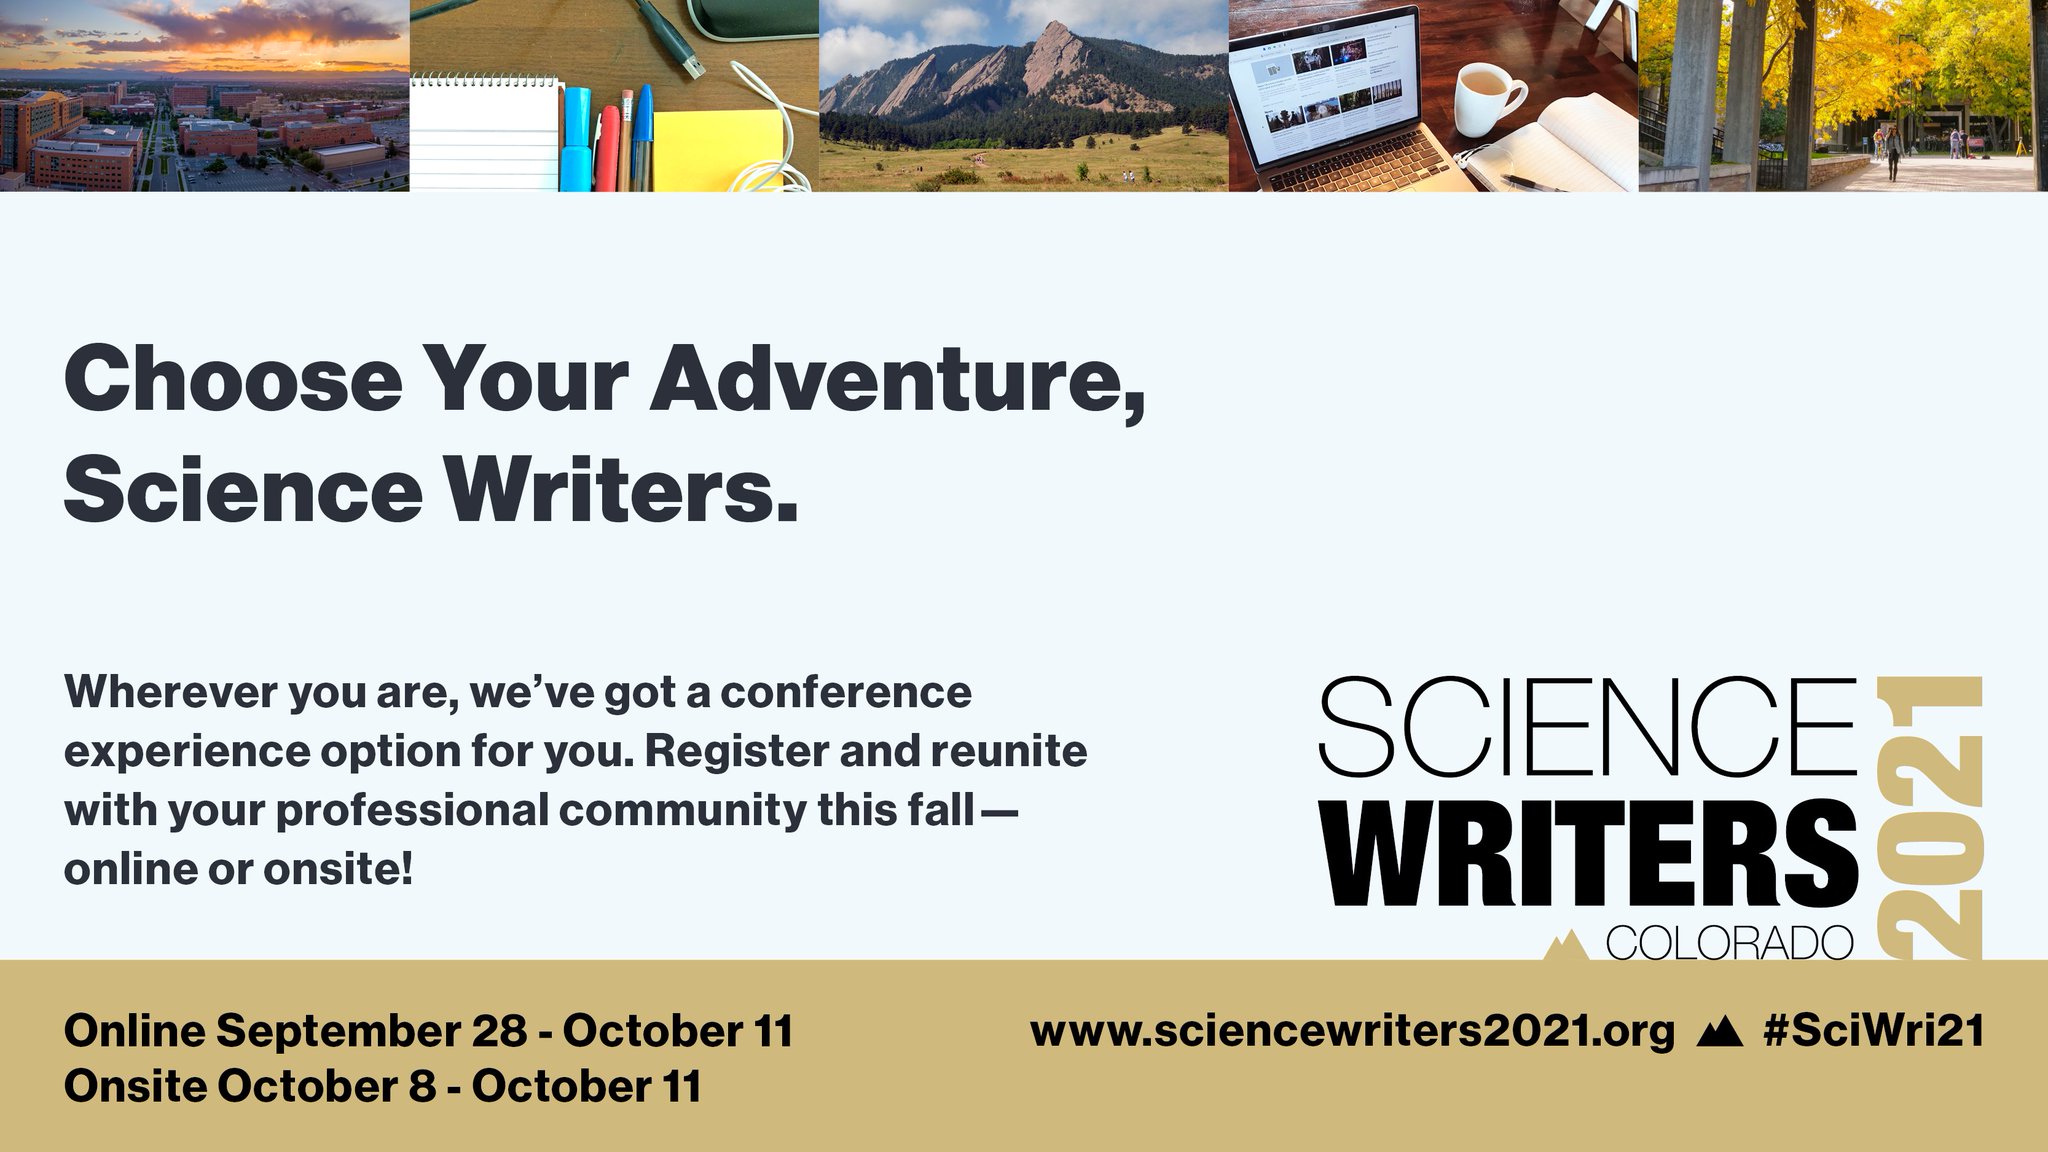 National Association of Science Writers (NASW) on Twitter